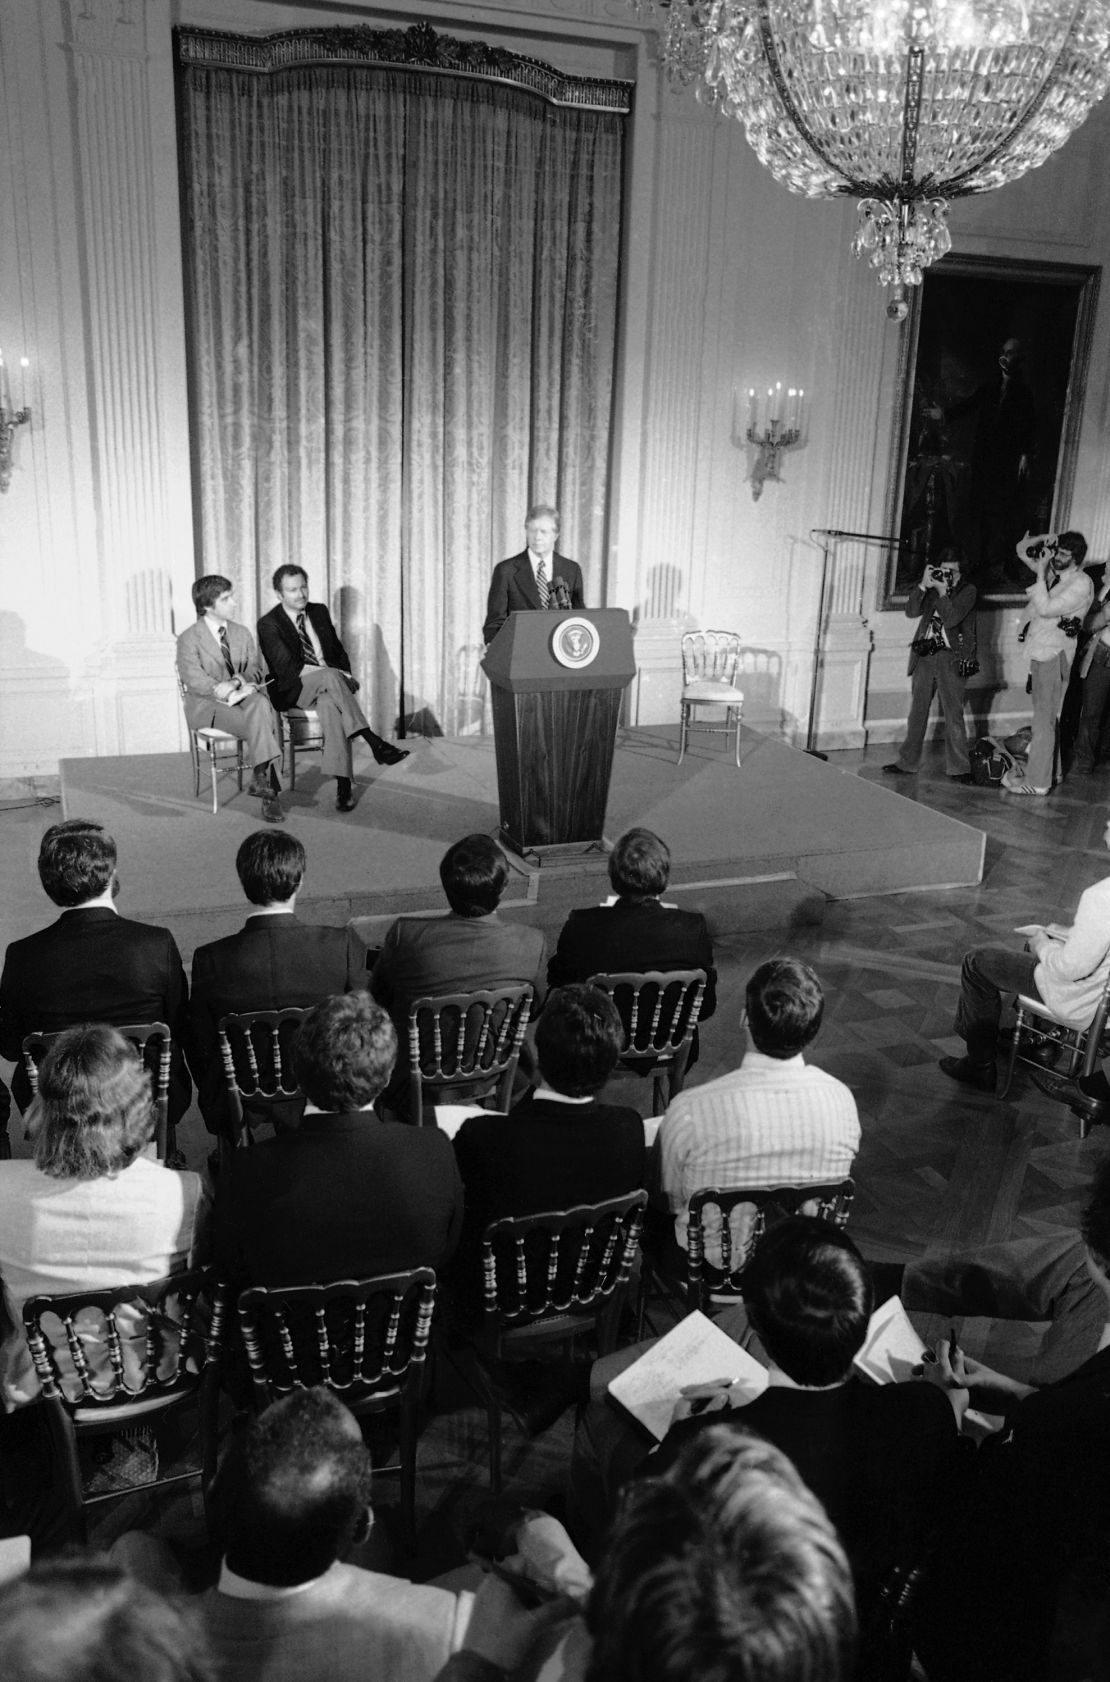 President Jimmy Carter addressed athletes set to compete in the Summer Olympic Games in Moscow at the White House in Washington on March 21, 1980. Carter asked them to support his proposed boycott of the Games to punish the Soviets for their invasion of Afghanistan, showing how the Olympics have been used by nation states as a form of protest.